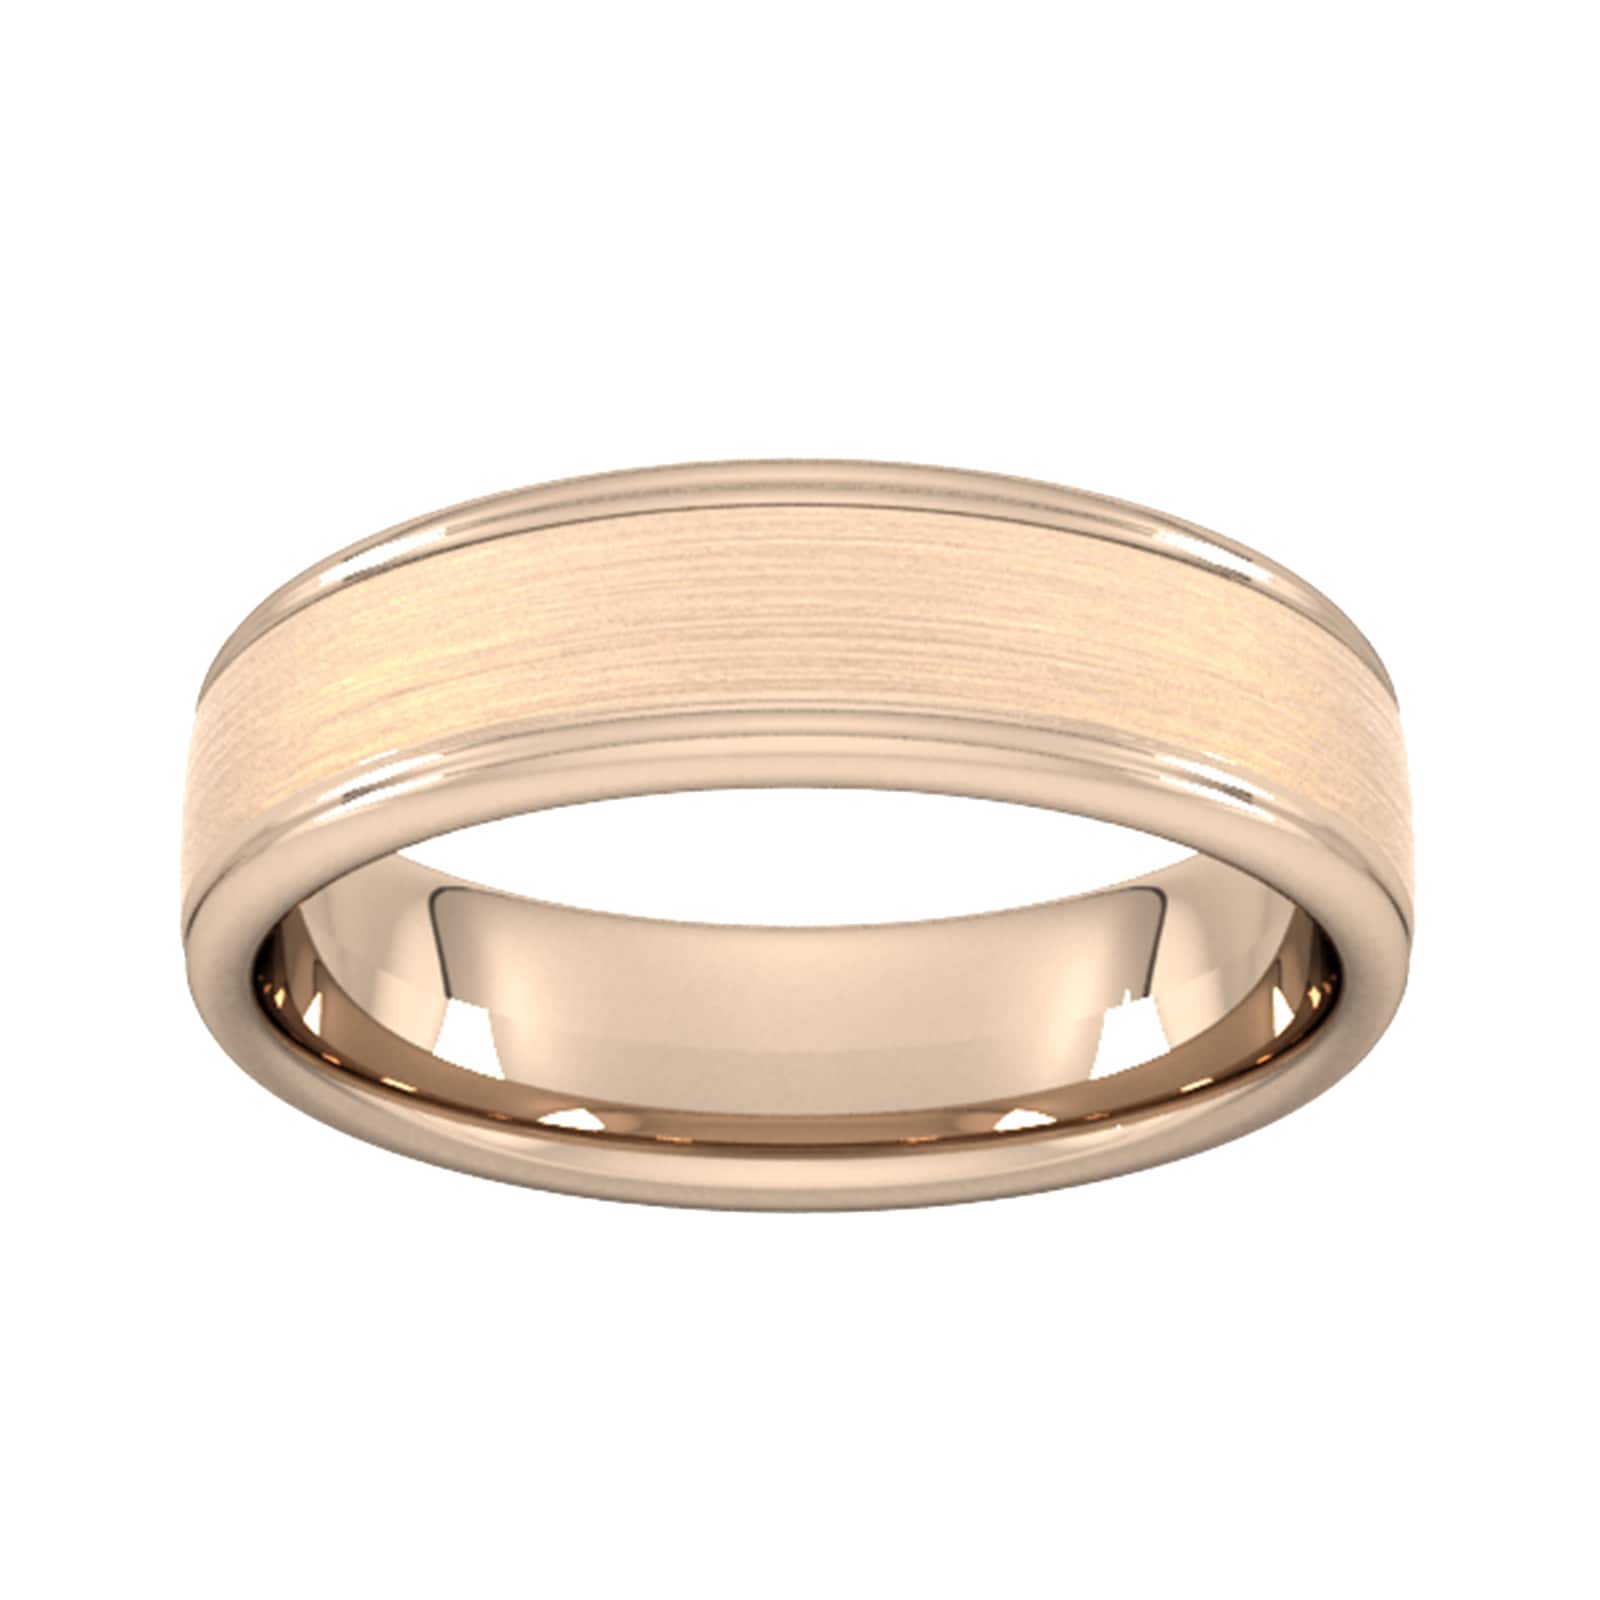 5mm Flat Court Heavy Matt Centre With Grooves Wedding Ring In 9 Carat Rose Gold - Ring Size O